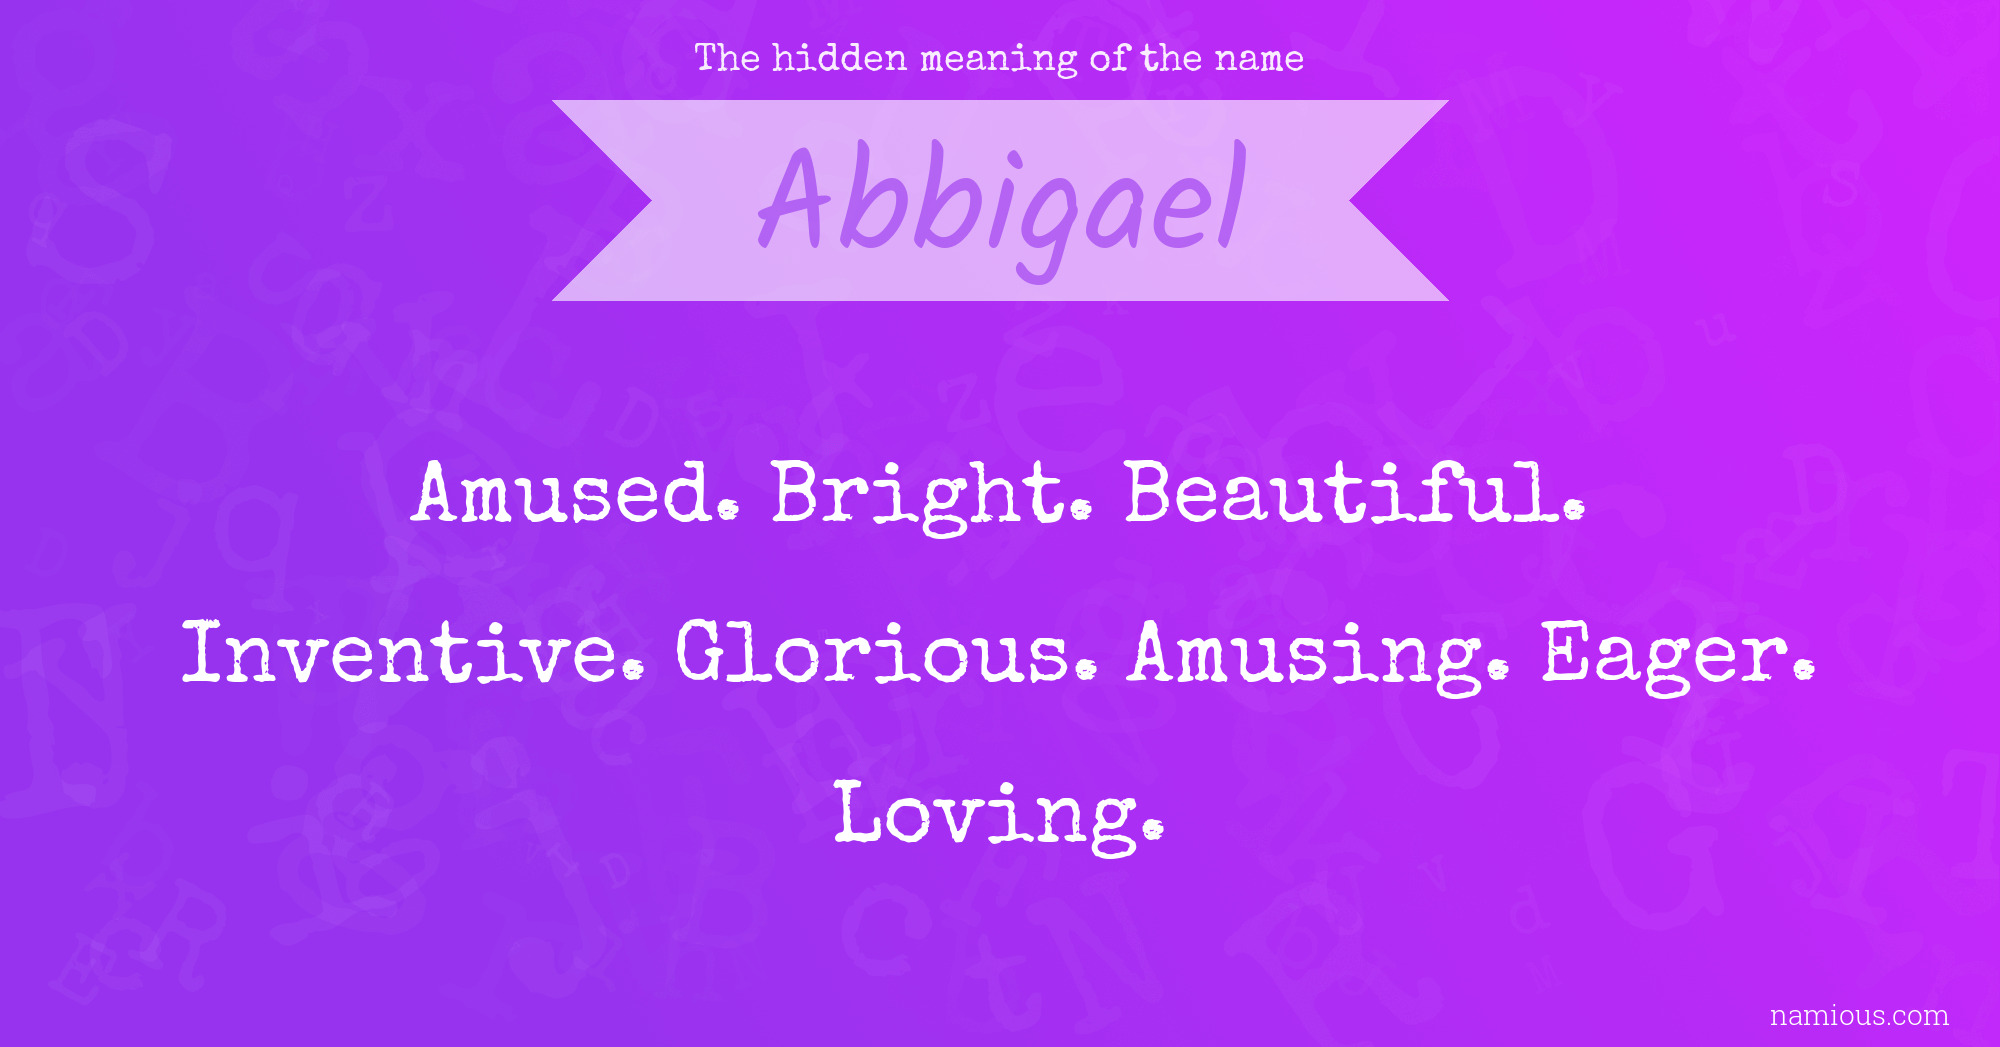 The hidden meaning of the name Abbigael